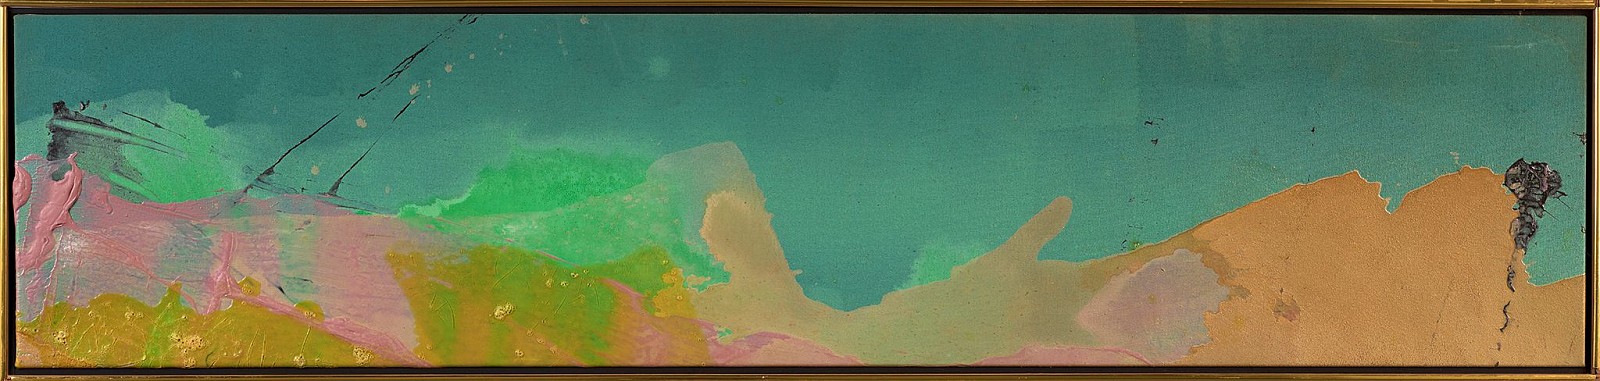 Walter Darby Bannard, Neptune's Sled, 1980
Acrylic on canvas, 15 7/8 x 64 5/8 in.
BAN-00113